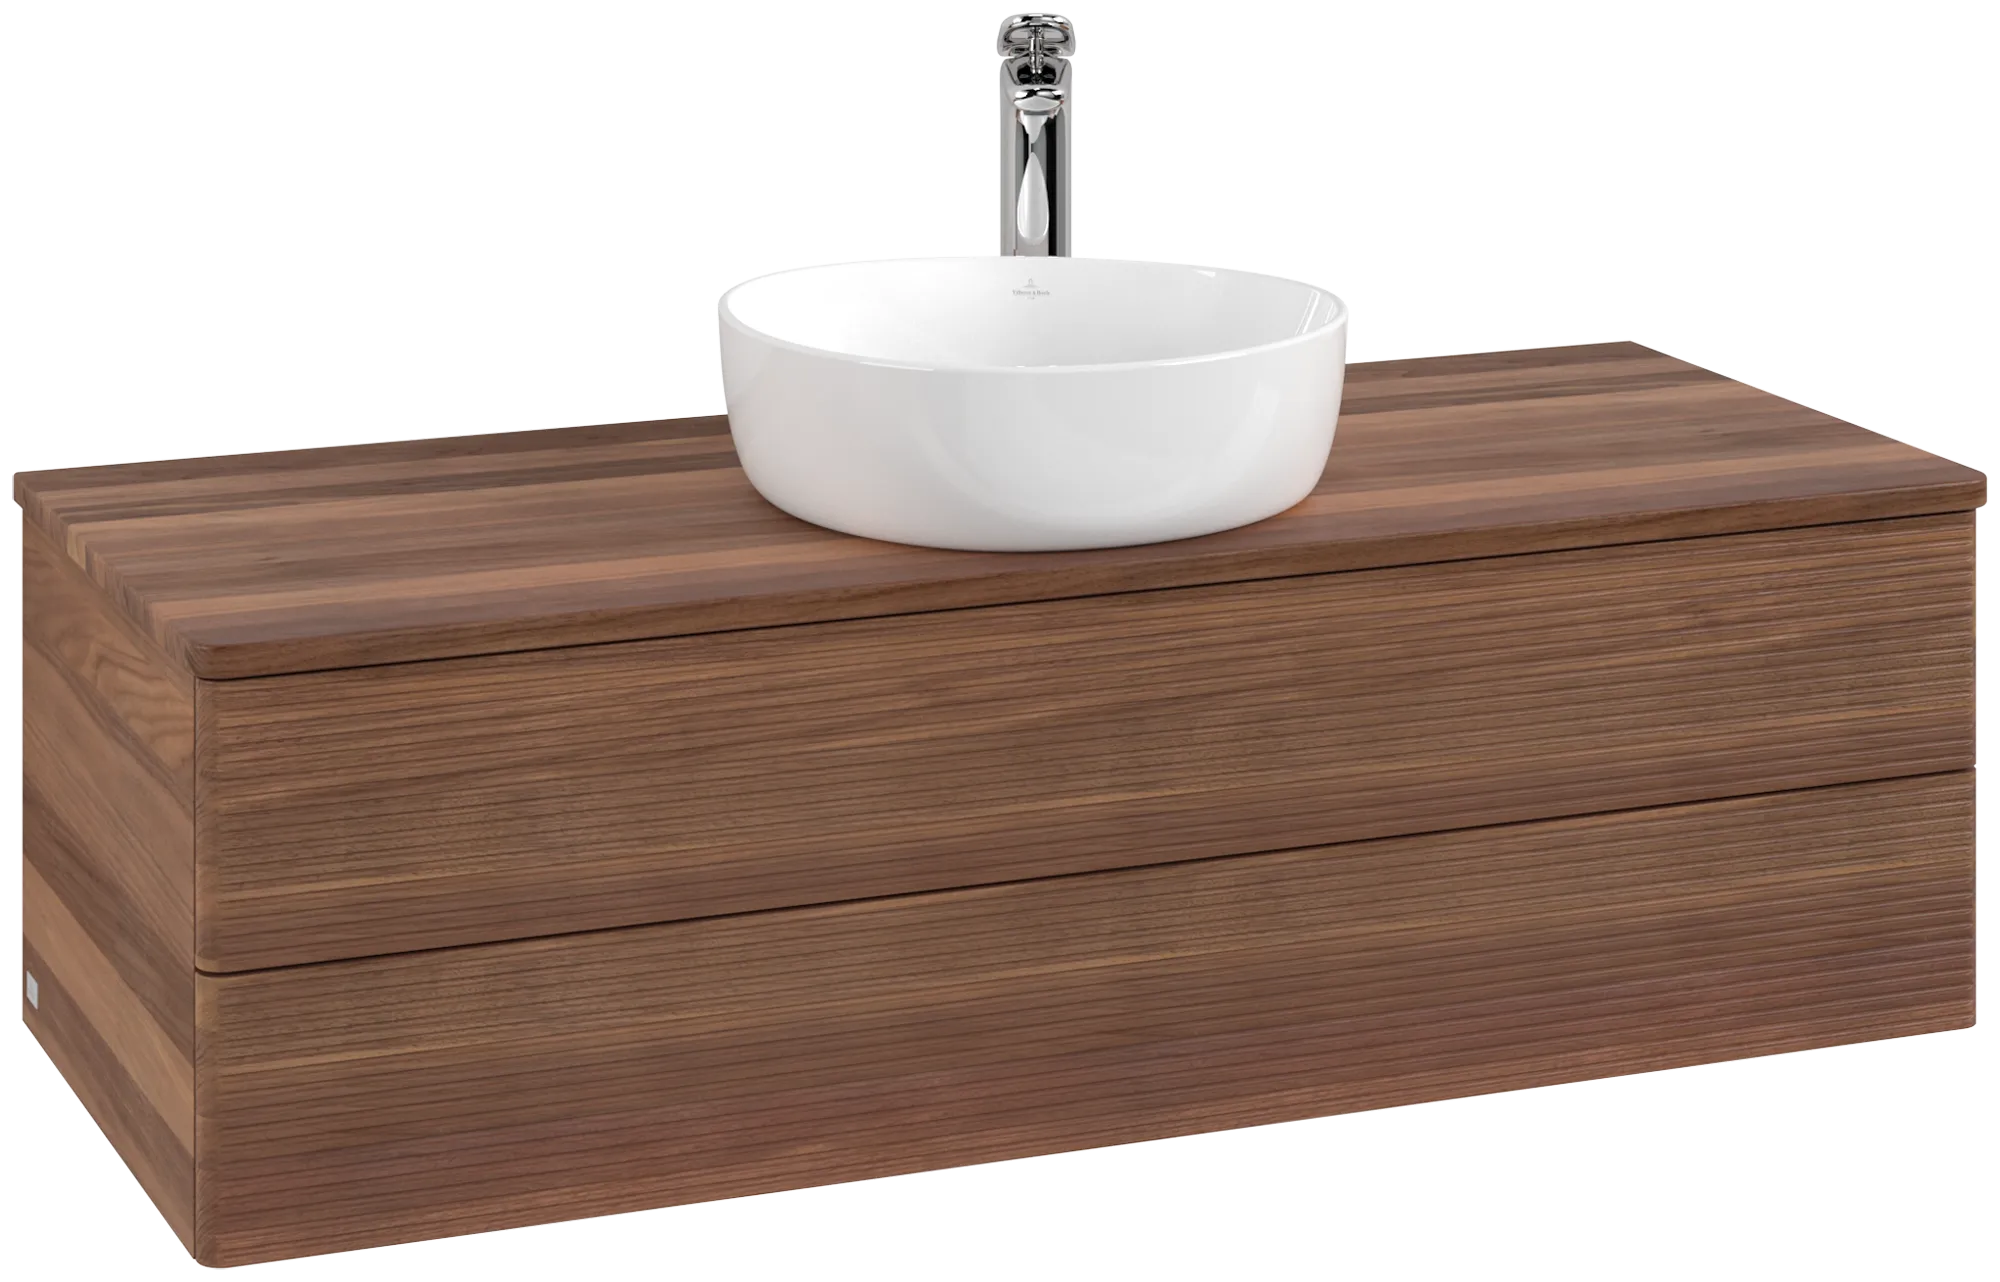 Picture of VILLEROY BOCH Antao Vanity unit, 2 pull-out compartments, 1200 x 360 x 500 mm, Front with grain texture, Warm Walnut / Warm Walnut #K21152HM